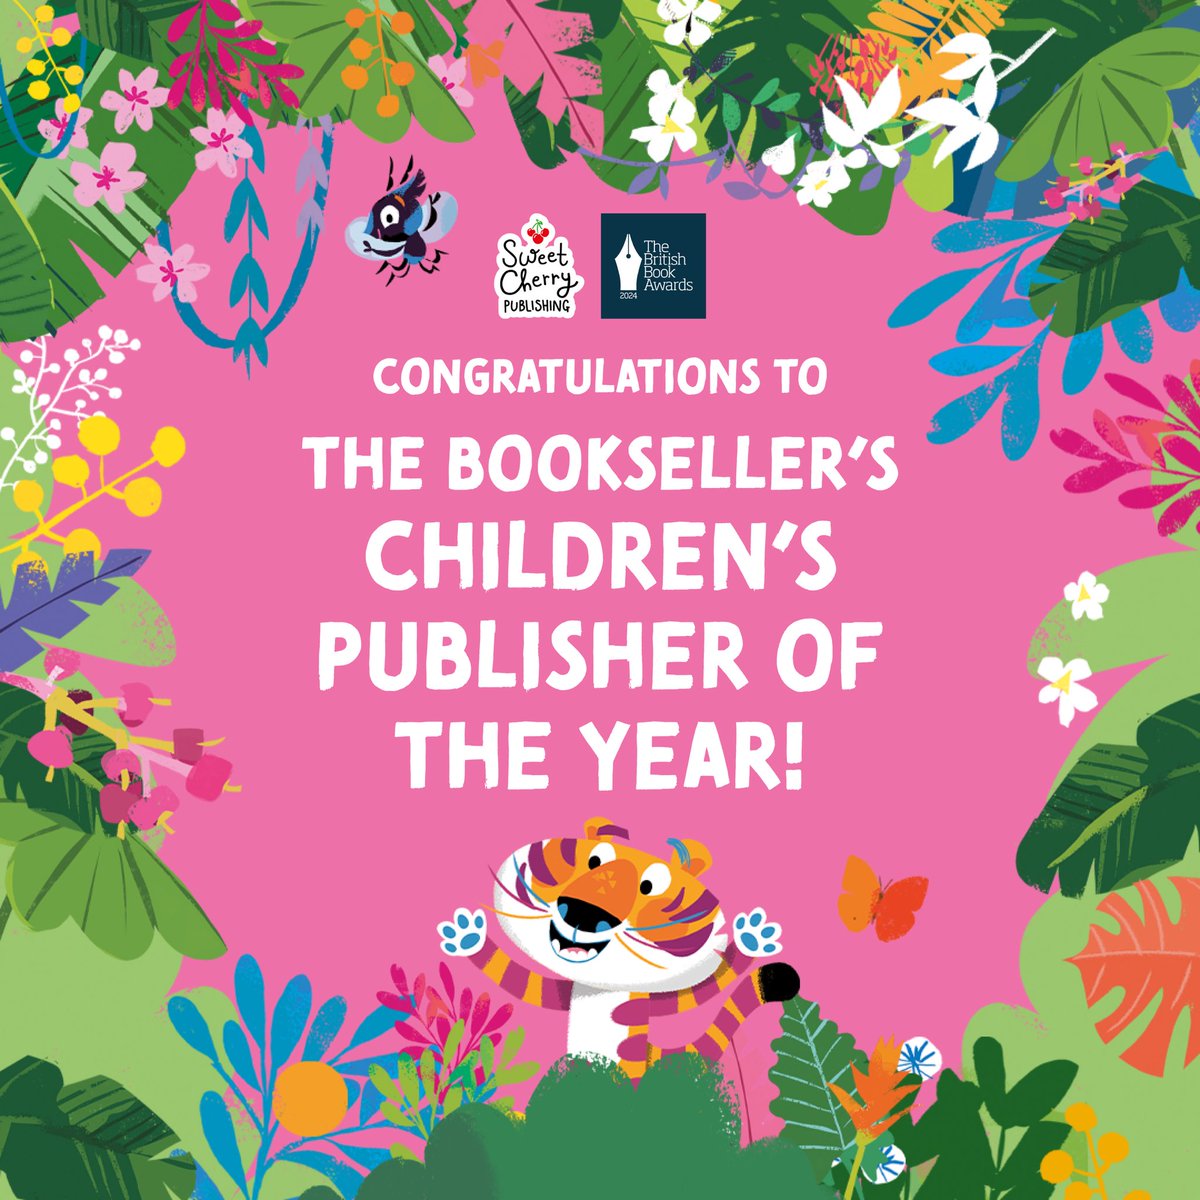 Congratulations to our friends over at @KidsBloomsbury on becoming Children’s Publisher of the Year! Of course, congratulations to all other winners at tonight’s Nibbies ceremony - it’s always a blast celebrating with yourselves and @thebookseller 🤩 #Nibbies